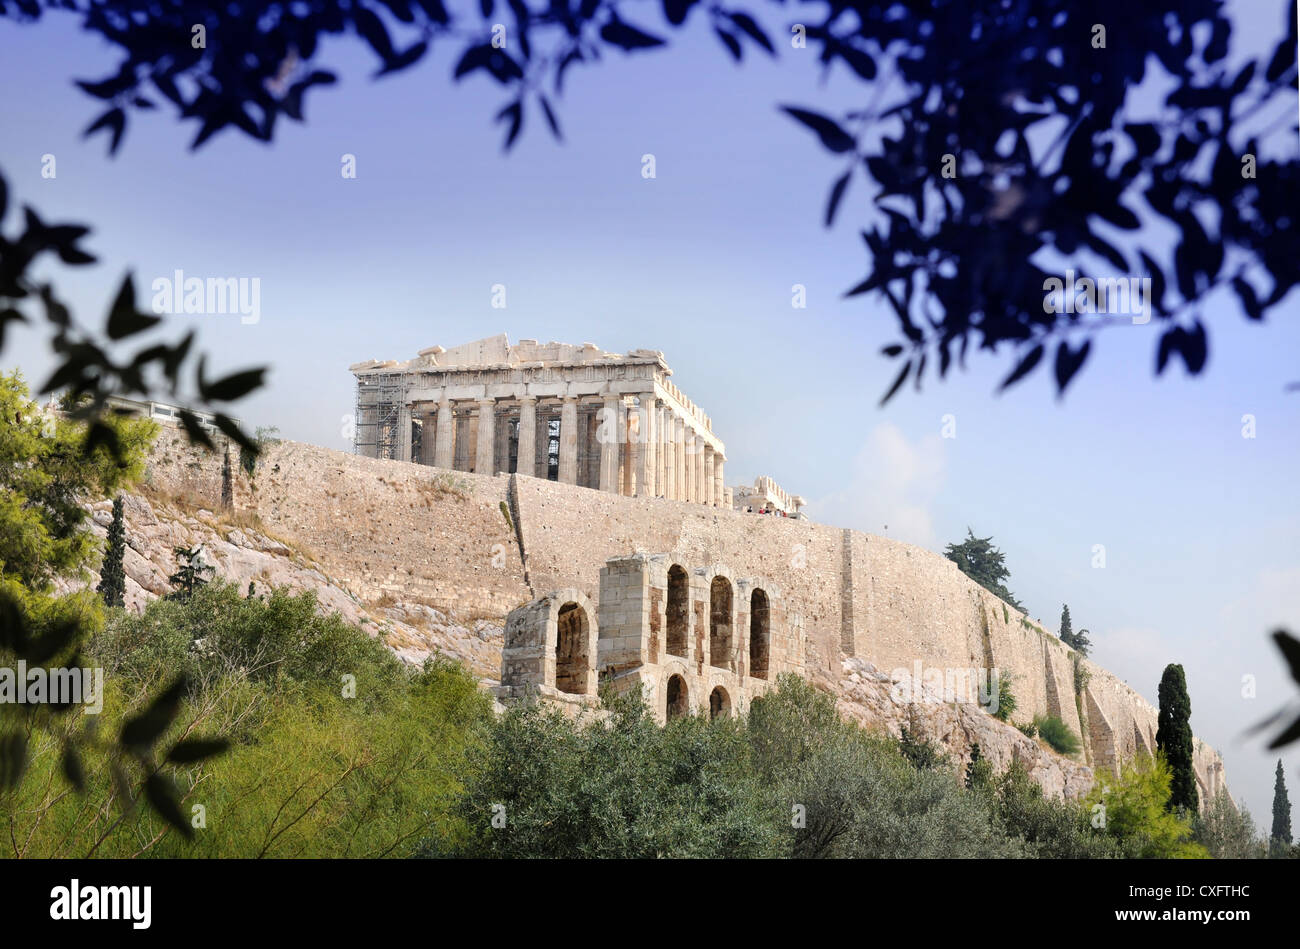 The Parthenon temple viewed from the base of the Acropolis in Athens, Greece Stock Photo